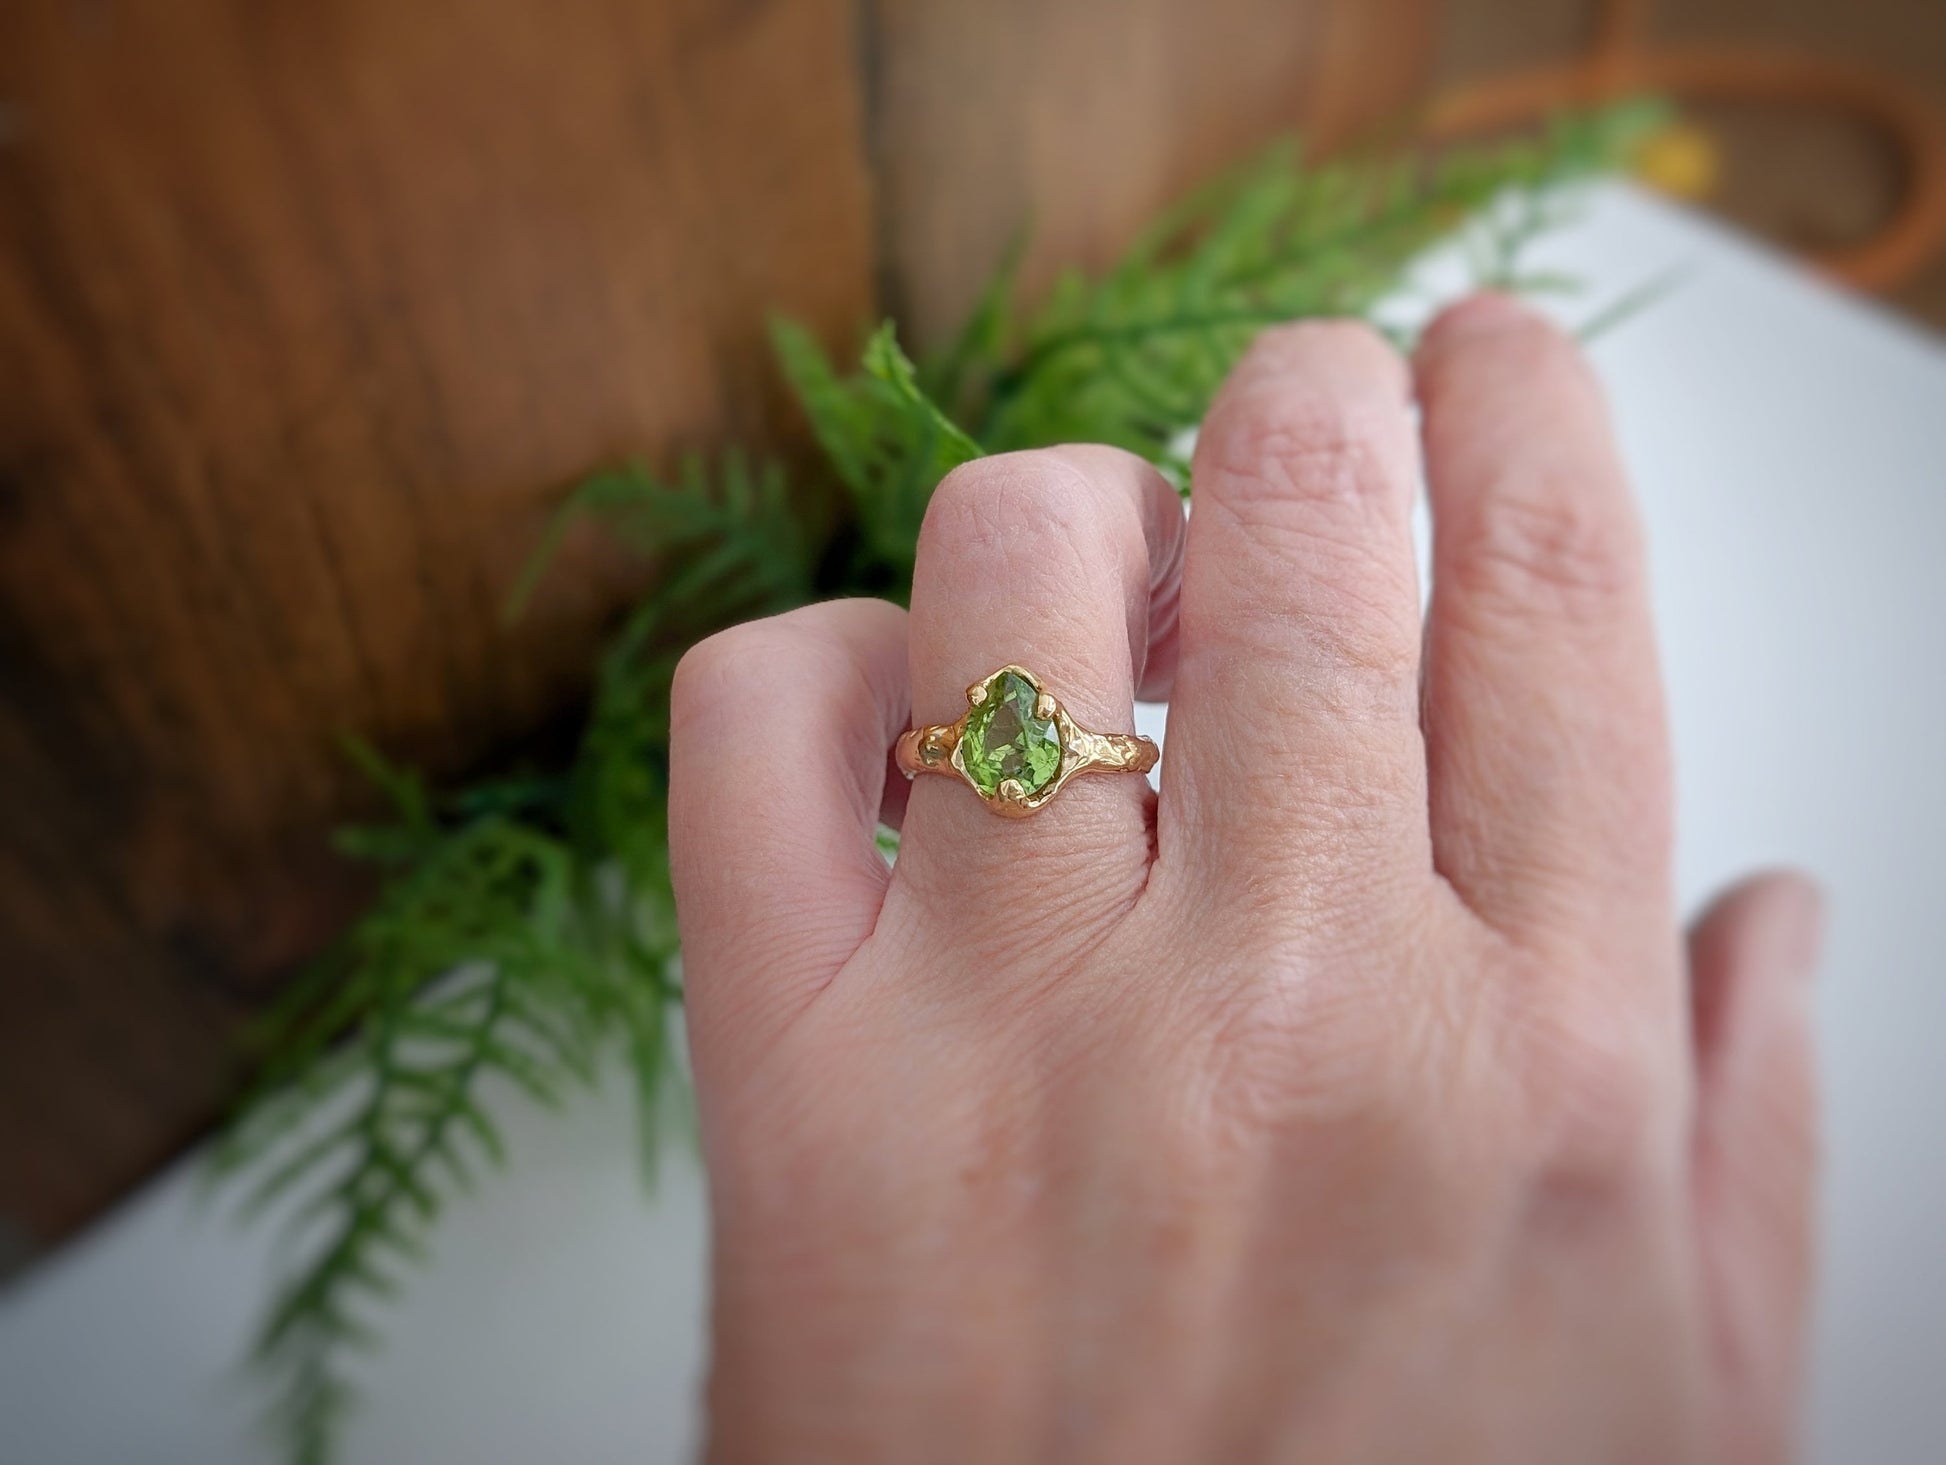 Woman's hand wearing a Large Pear shape Peridot set by prongs on a textured Molten Solid 14k Gold band